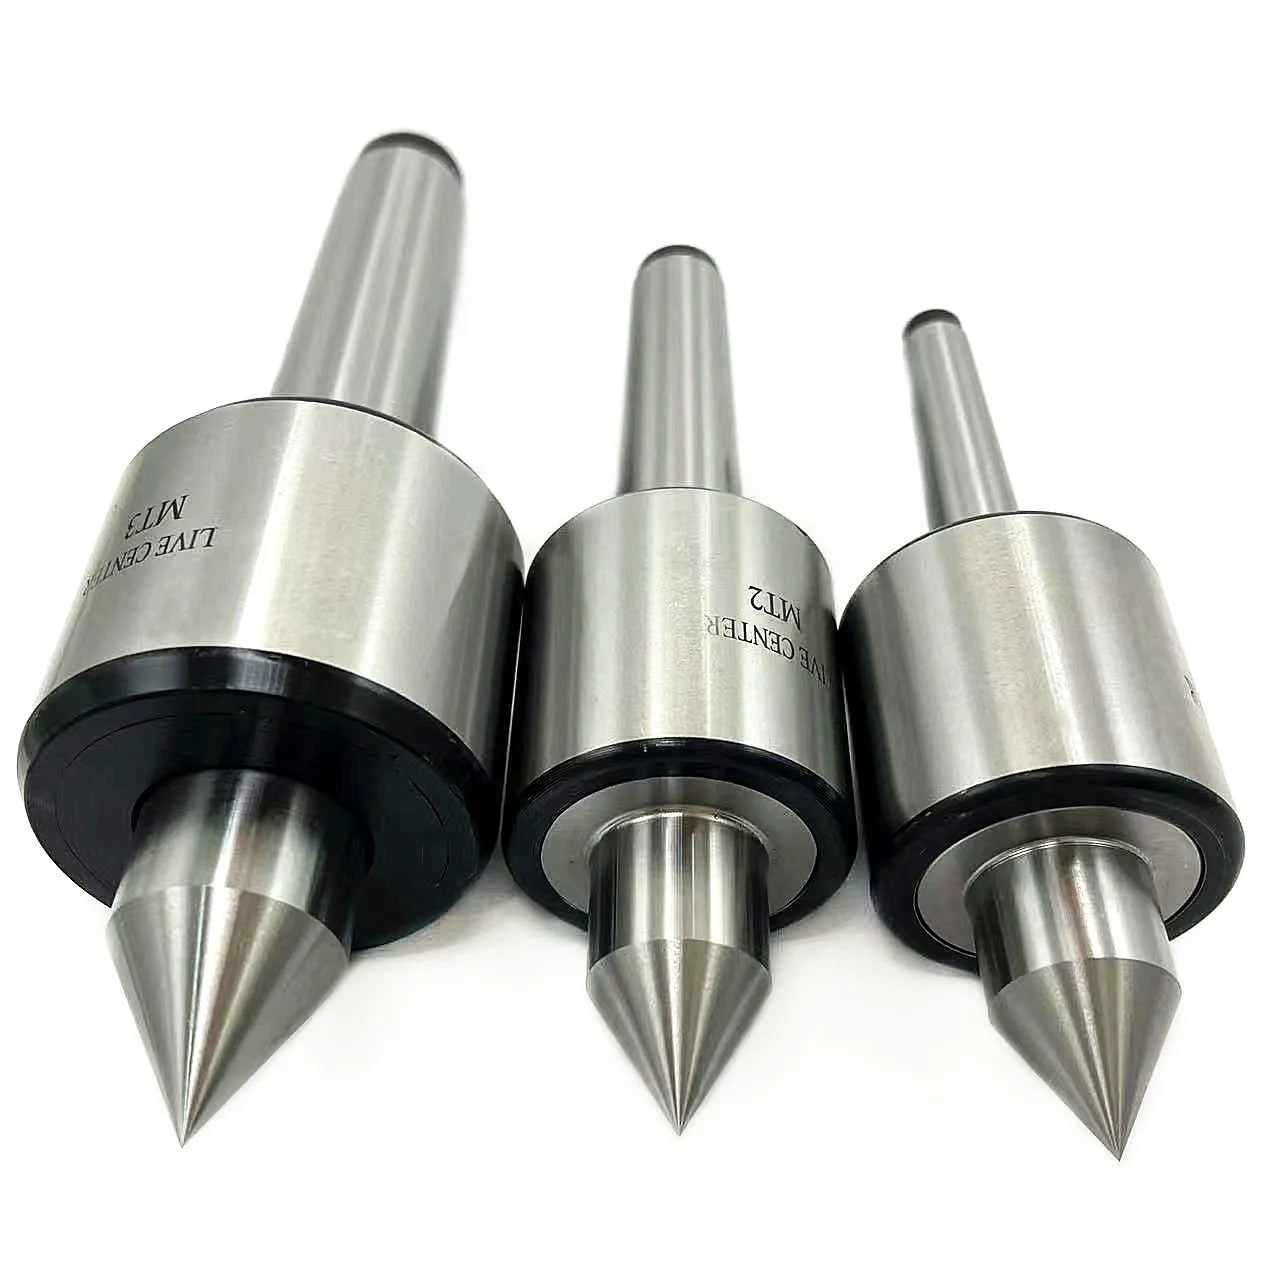 Live center MT1 MT2 MT3 new type Machine tool thimble rotary center tip lathe movable center cone cutter rotary milling machine